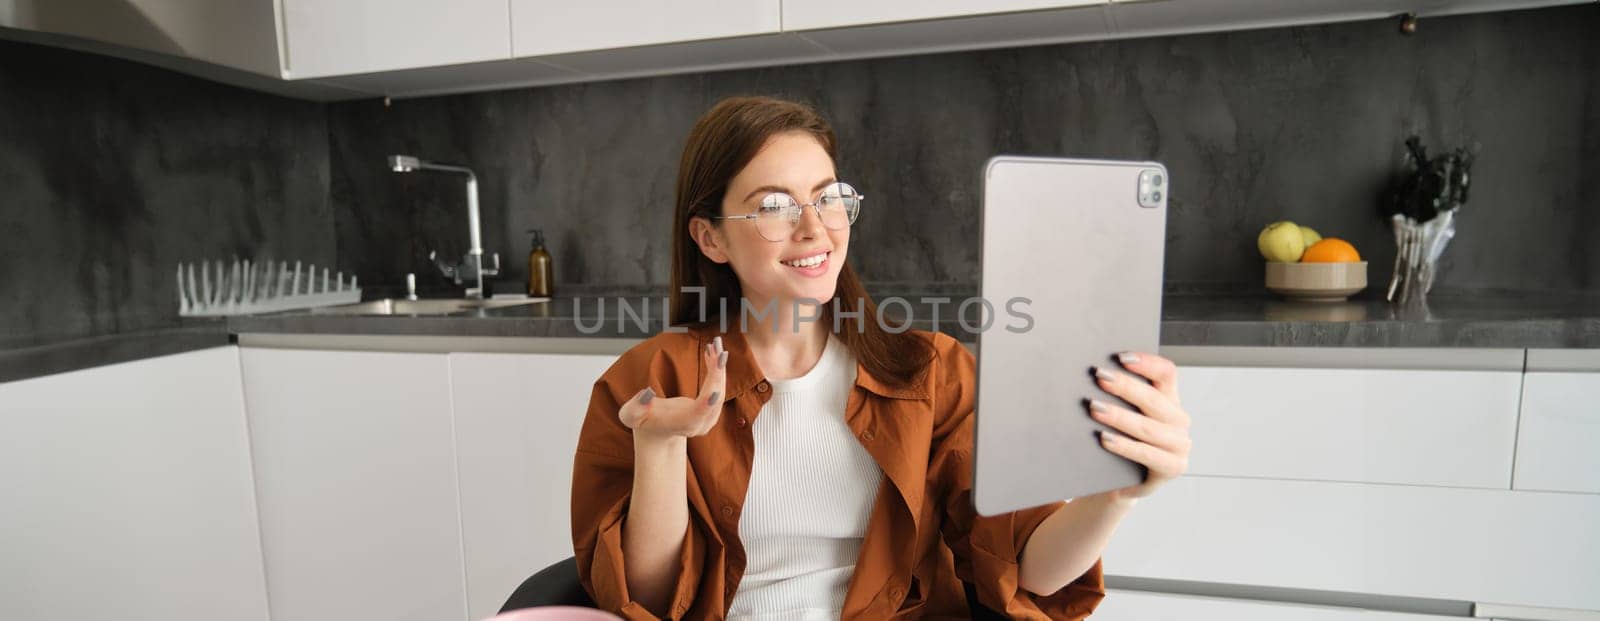 Portrait of young woman joins online course on digital tablet, having conversation, chatting on remote, sitting in kitchen.